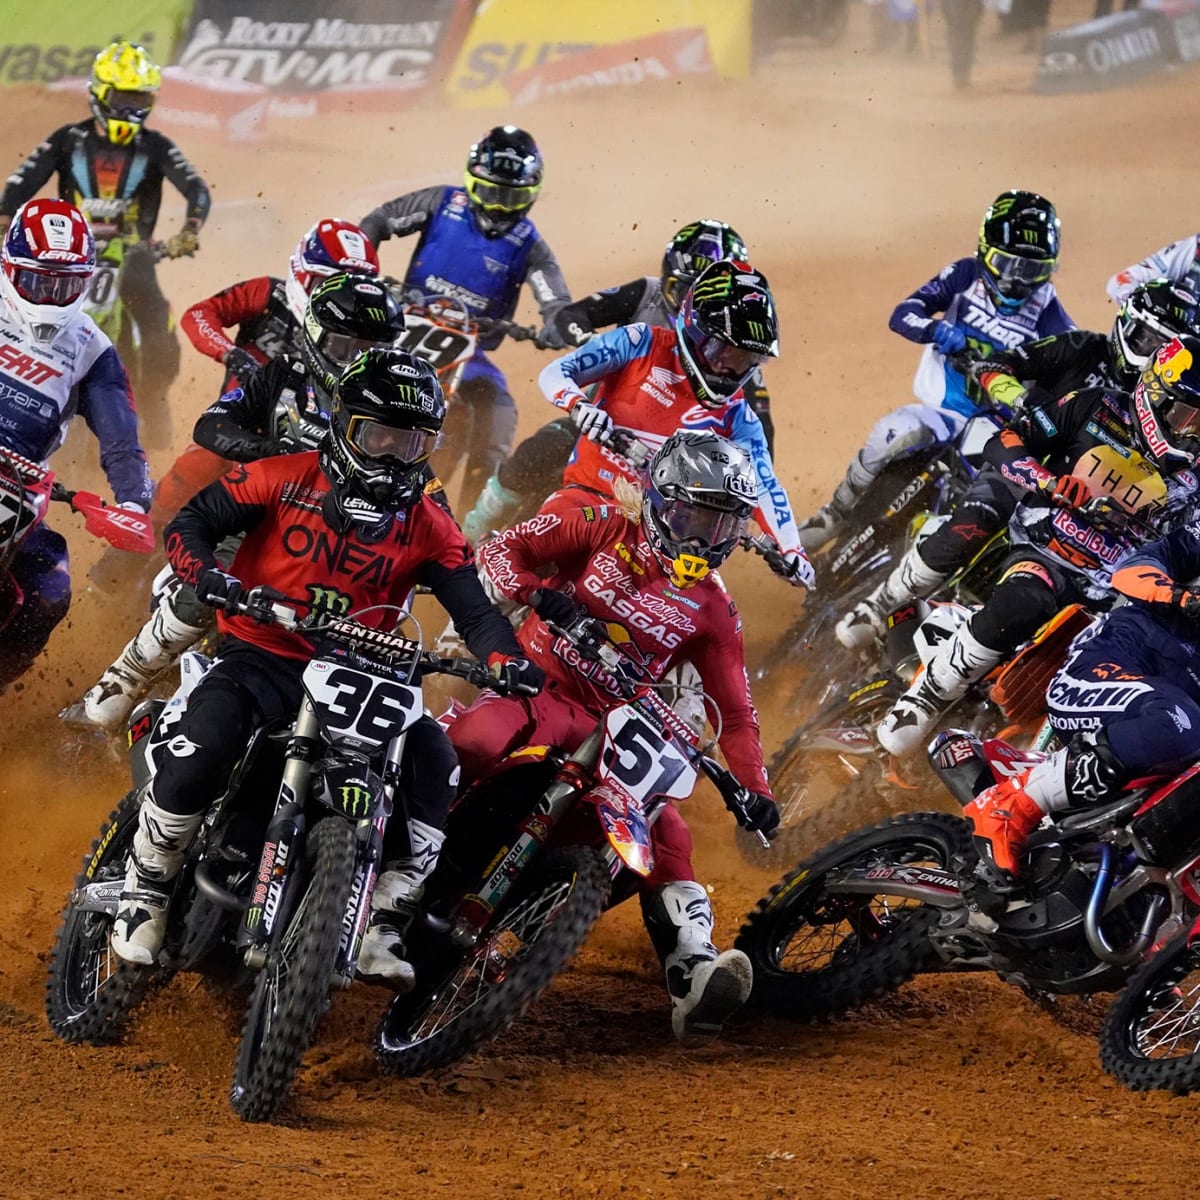 Watch Motocross of Nations race 1 Live stream, TV channel - How to Watch and Stream Major League and College Sports